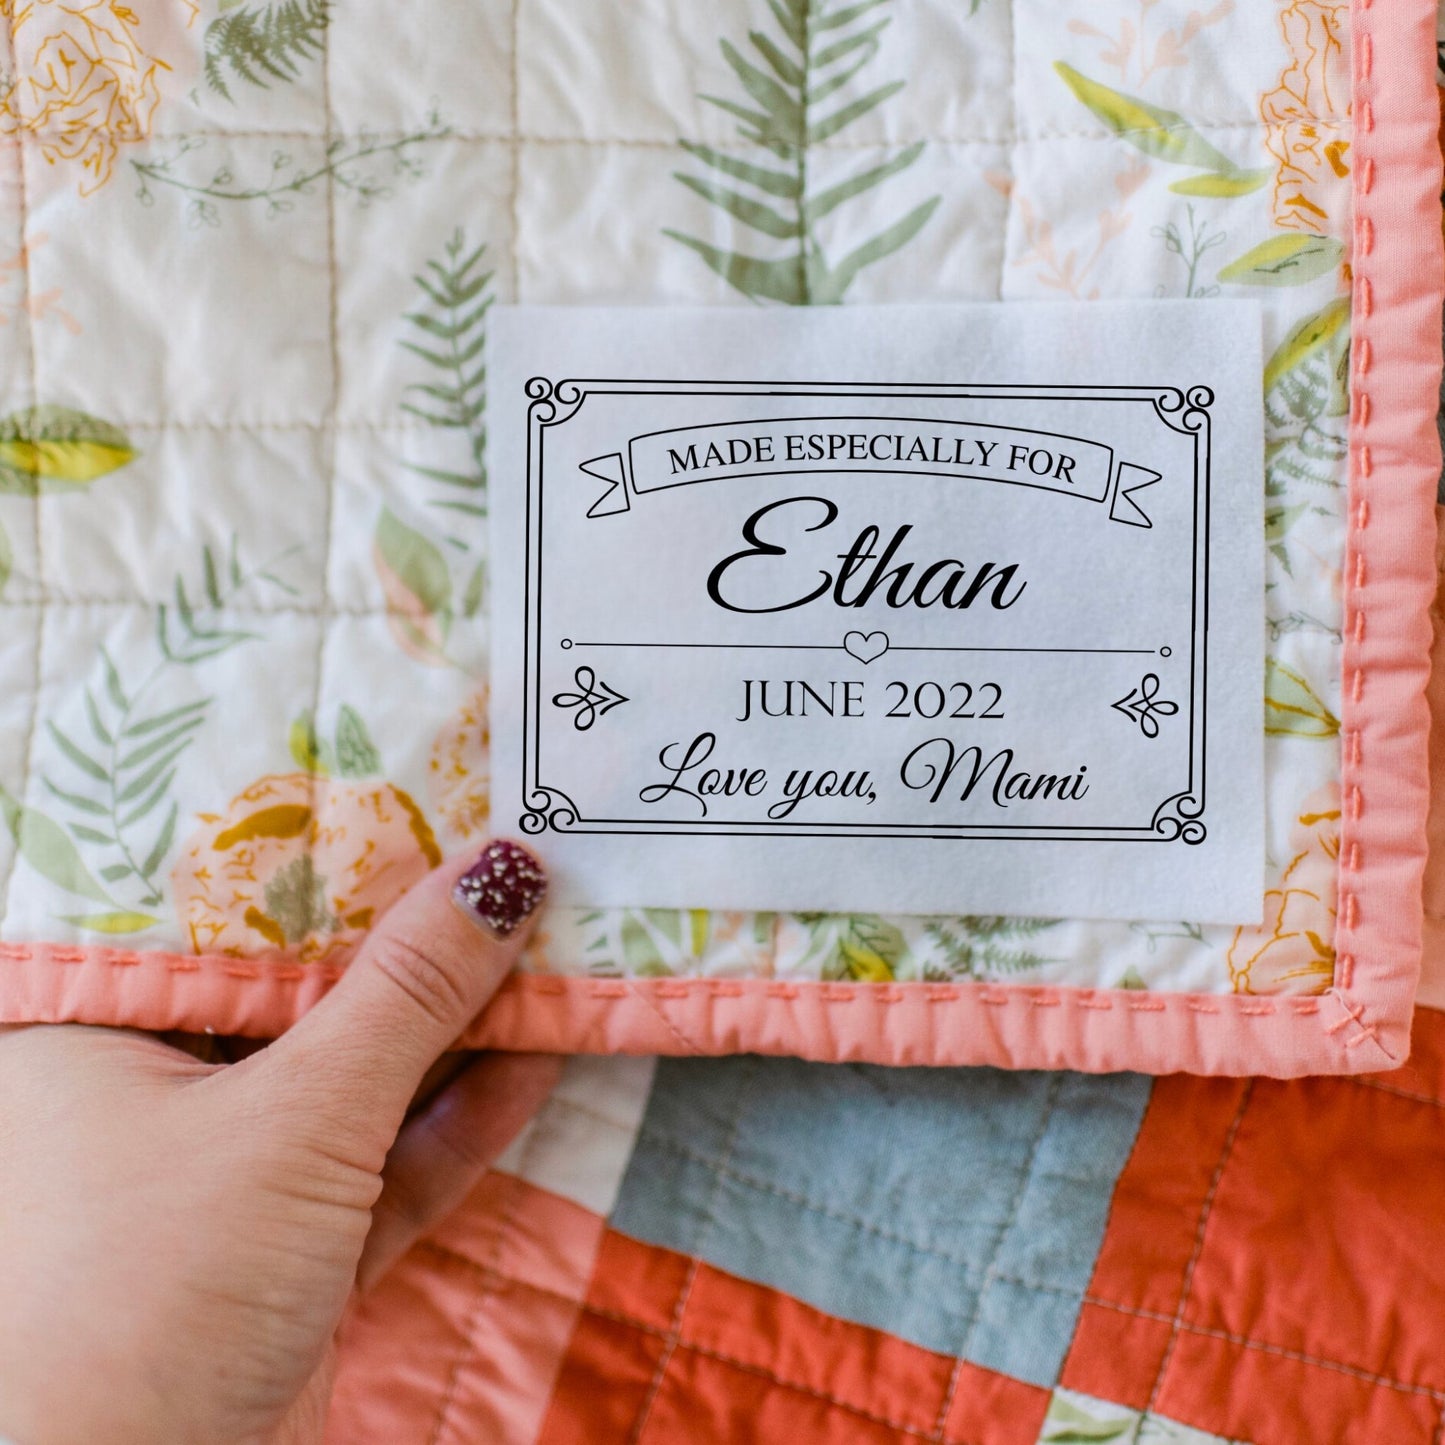 Custom quilt label for quilt gifting - Jammin Threads